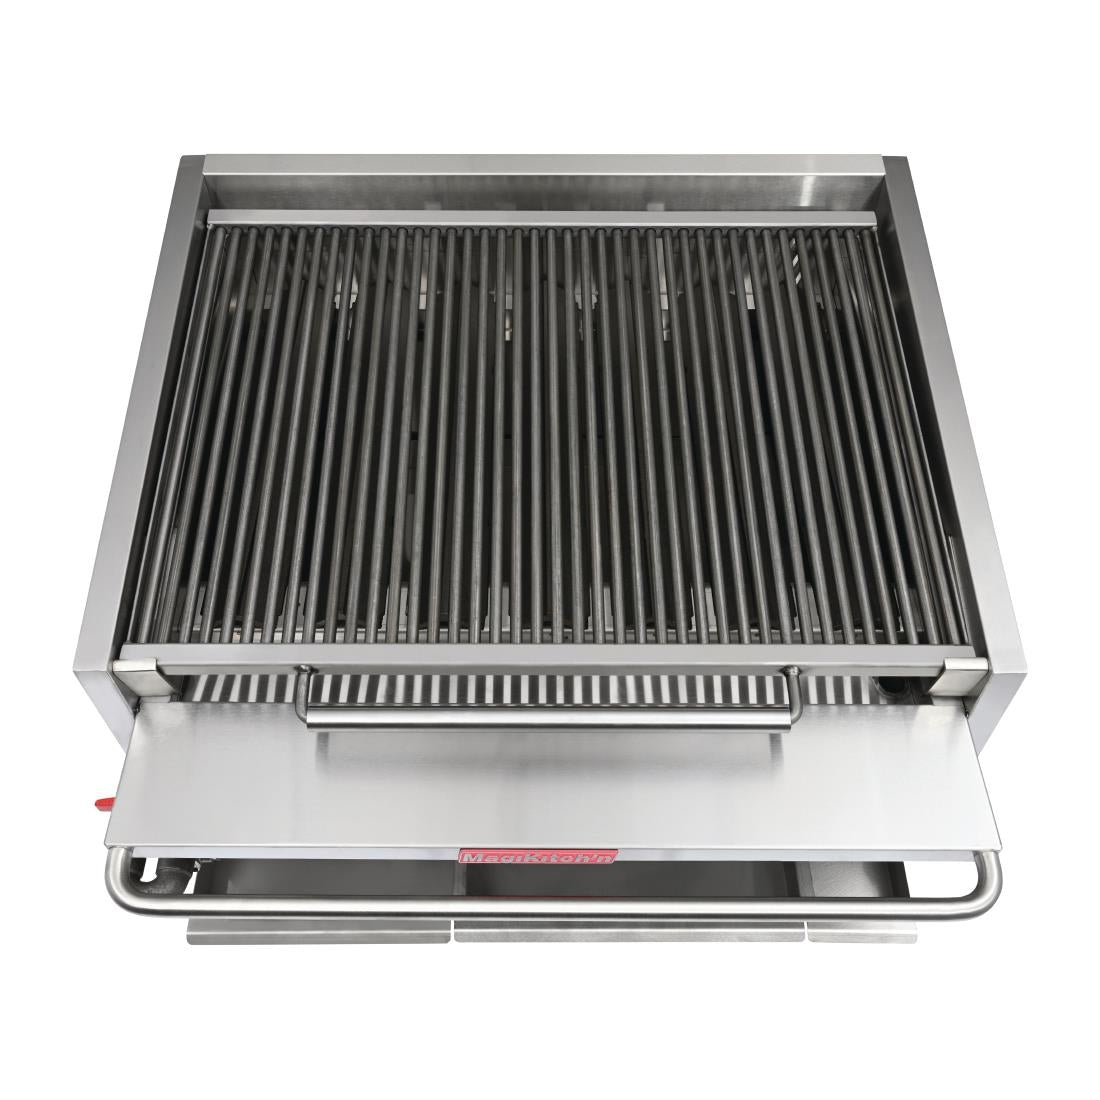 FP887 MagiKitch'n Gas Chargrill RMB624 JD Catering Equipment Solutions Ltd